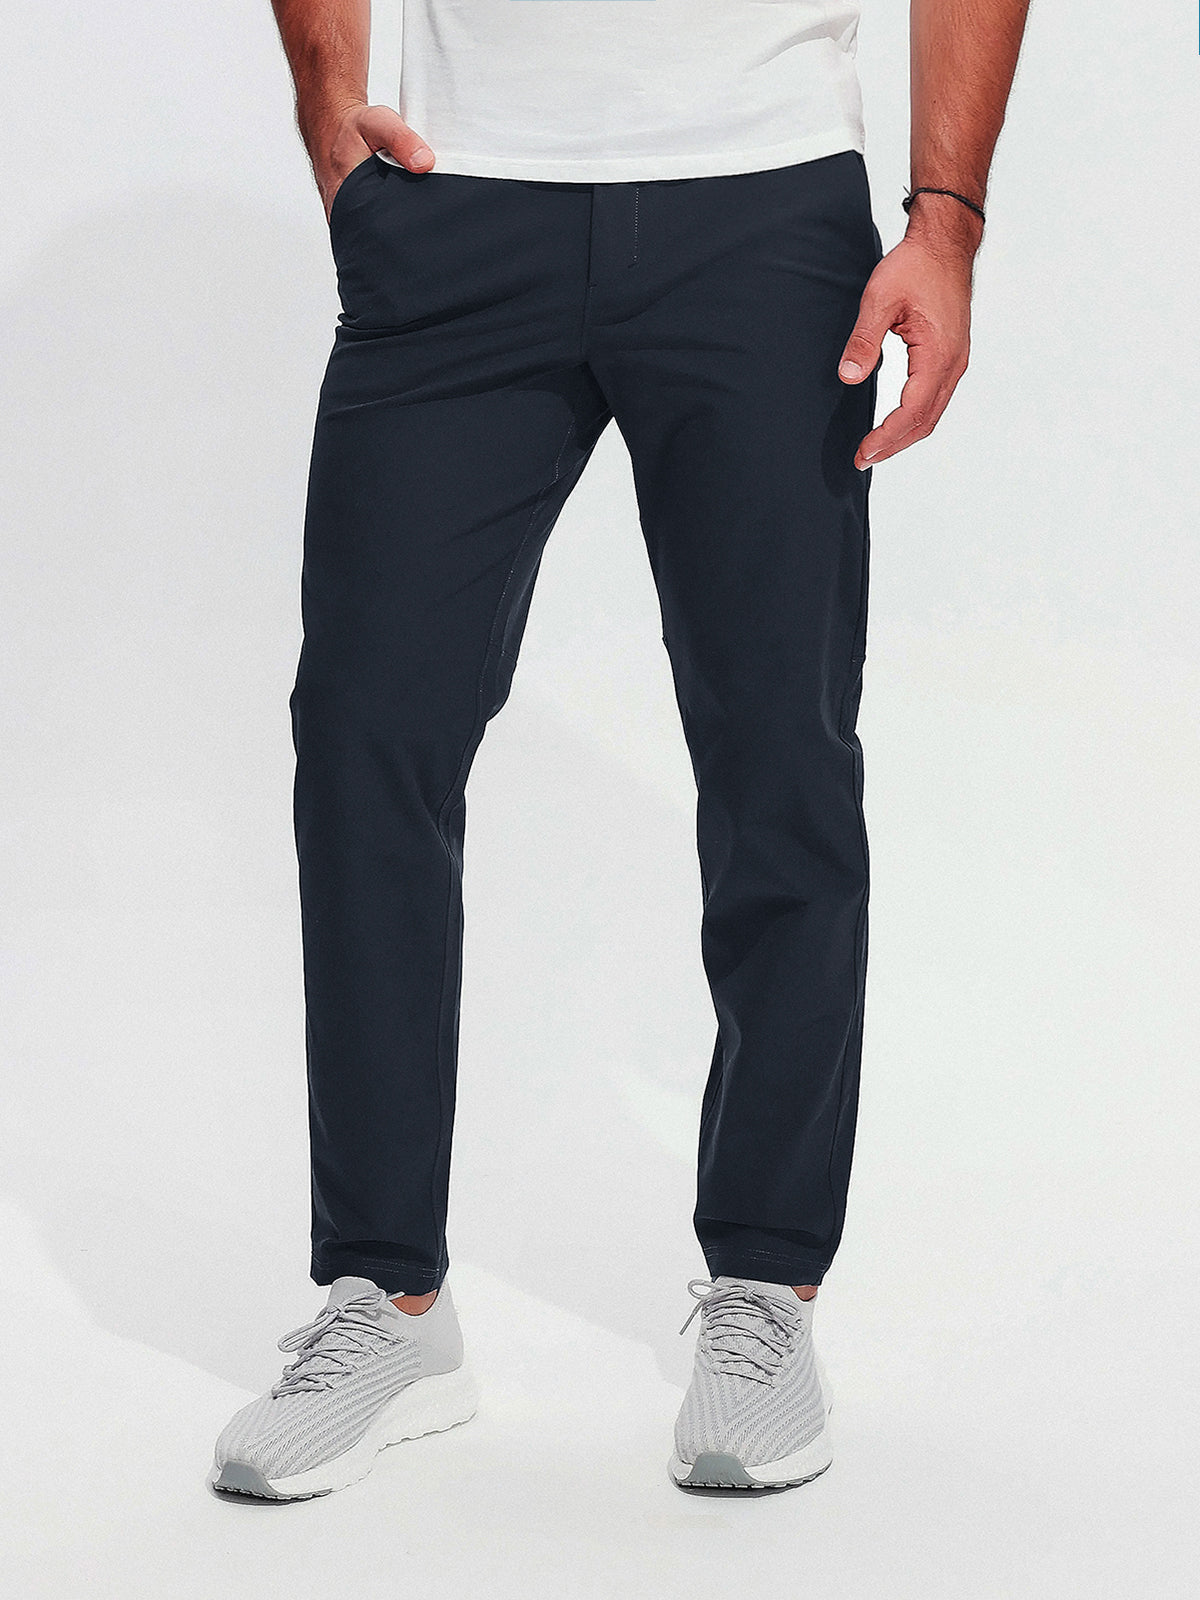 M's Commission Everyday Performance Chino Pants-Zittor